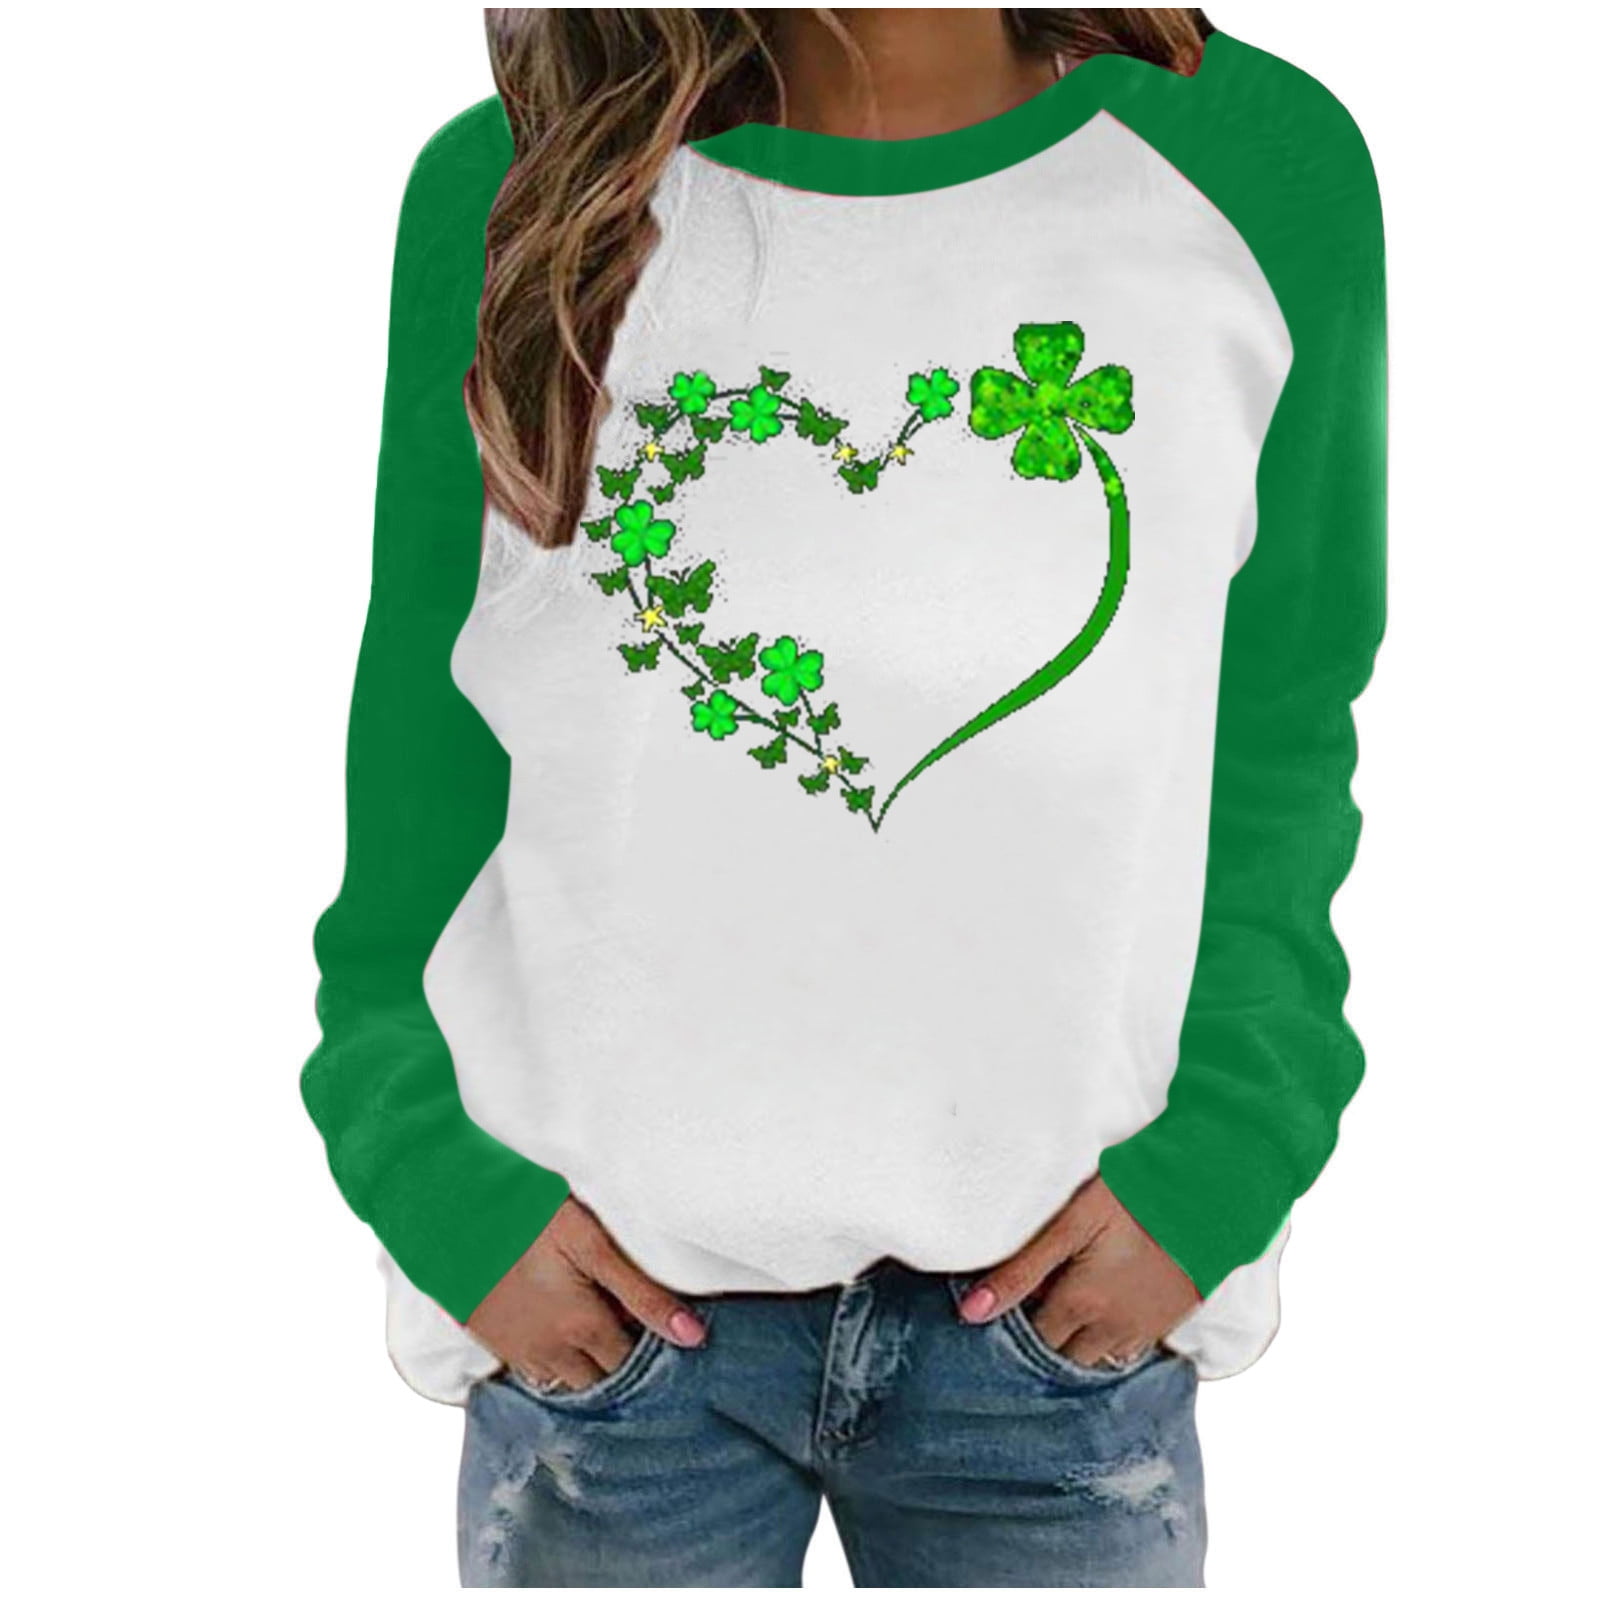 ZQGJB St. Patrick's Graphic Sweatshirts for Women Cute Green Clover Heart  Pattern Print Long Sleeve Spliciing Tops Lightweight Crew Neck Pullover